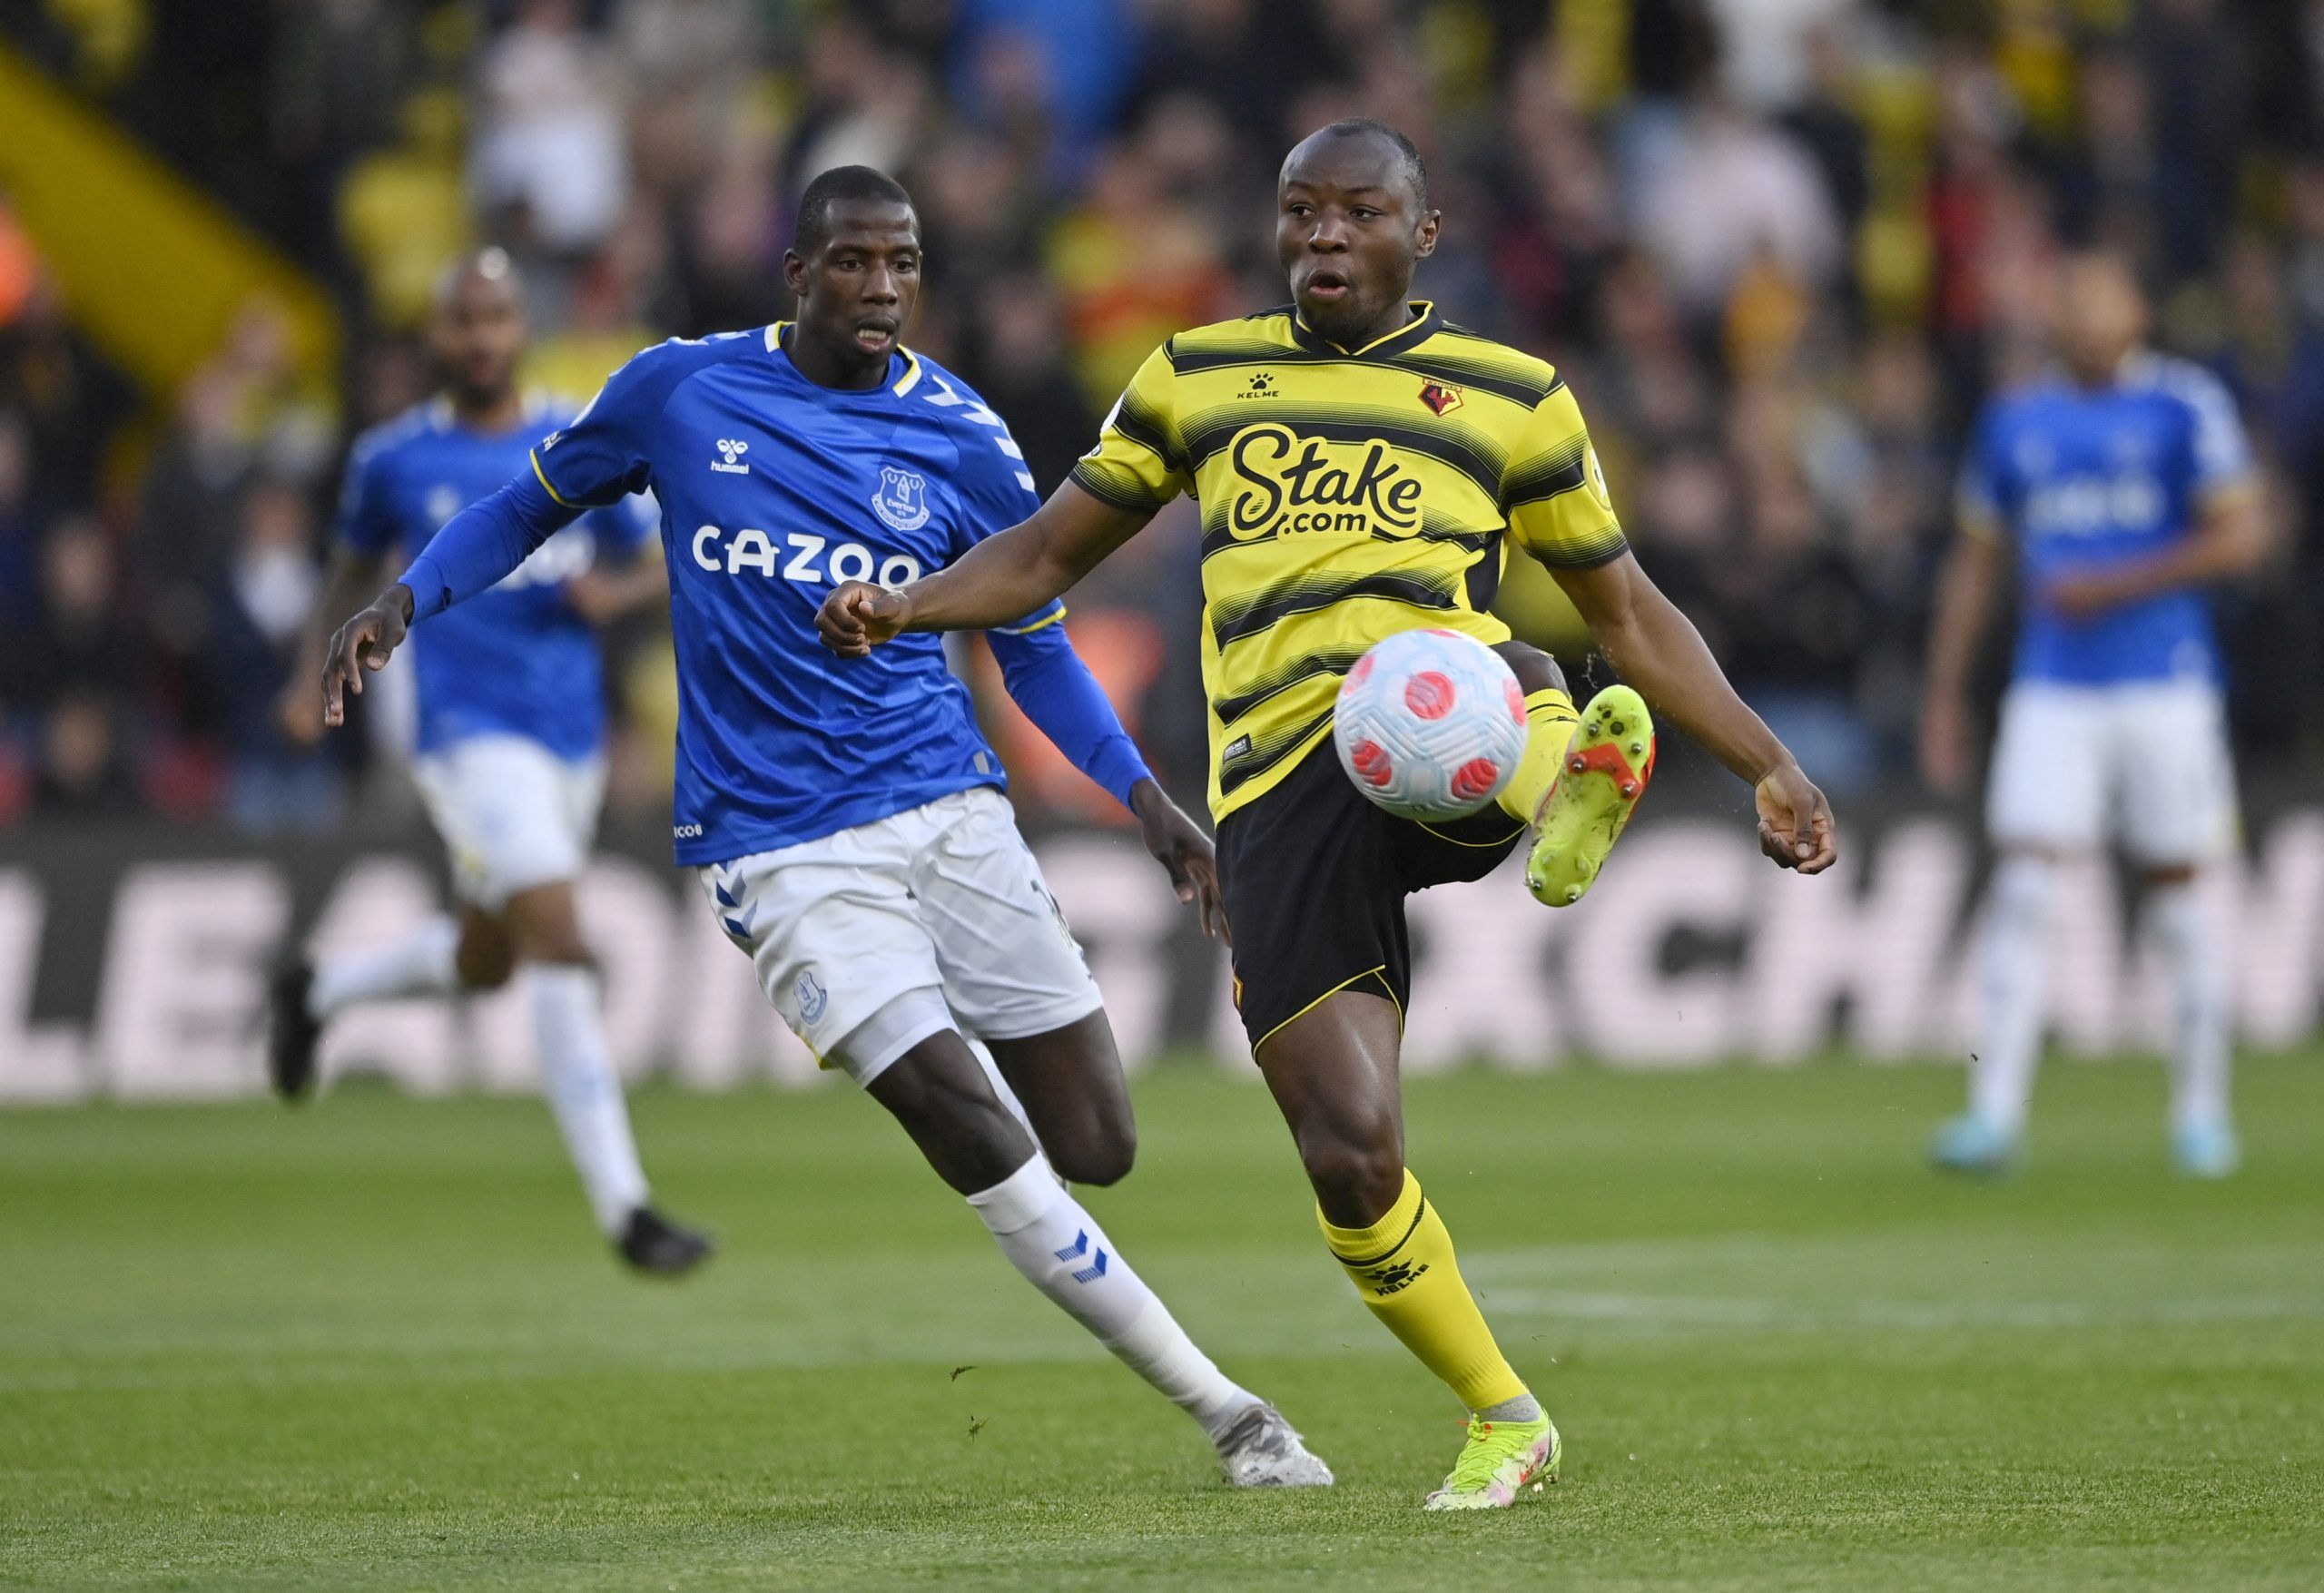 Abdoulaye Doucoure, Everton, Everton news, Performance In Numbers, Goodison Park, Toffees, Everton latest news, Everton performance review, EFC news, EFC latest news, EFC update, EFC performance